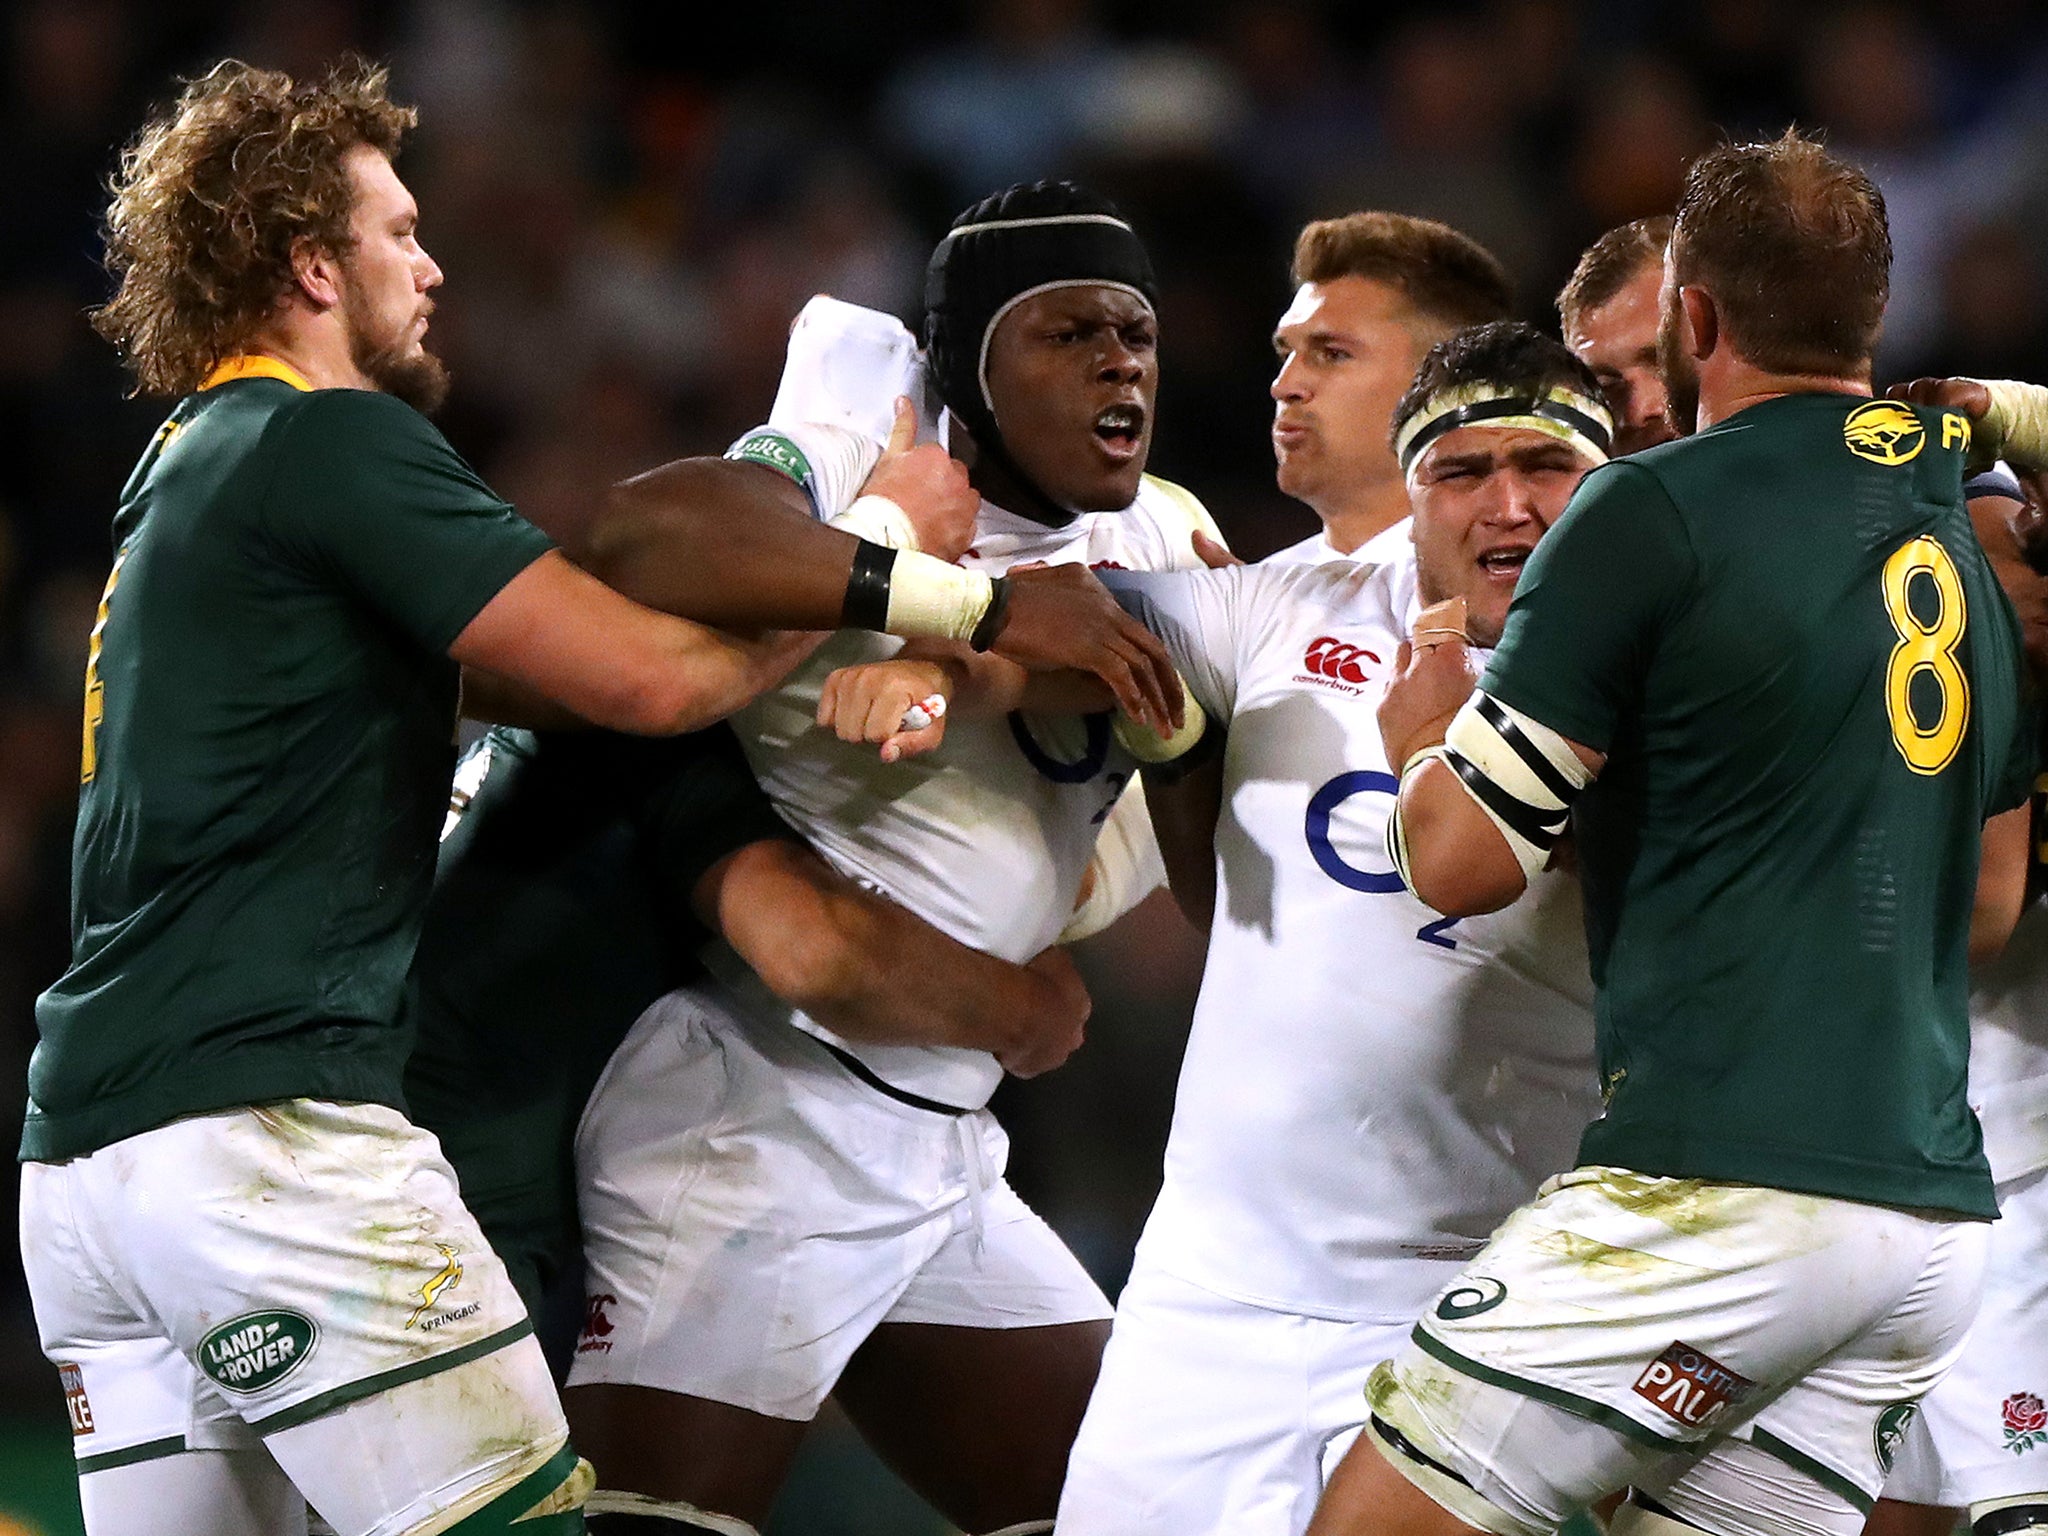 England have lost the series to South Africa with a game to spare